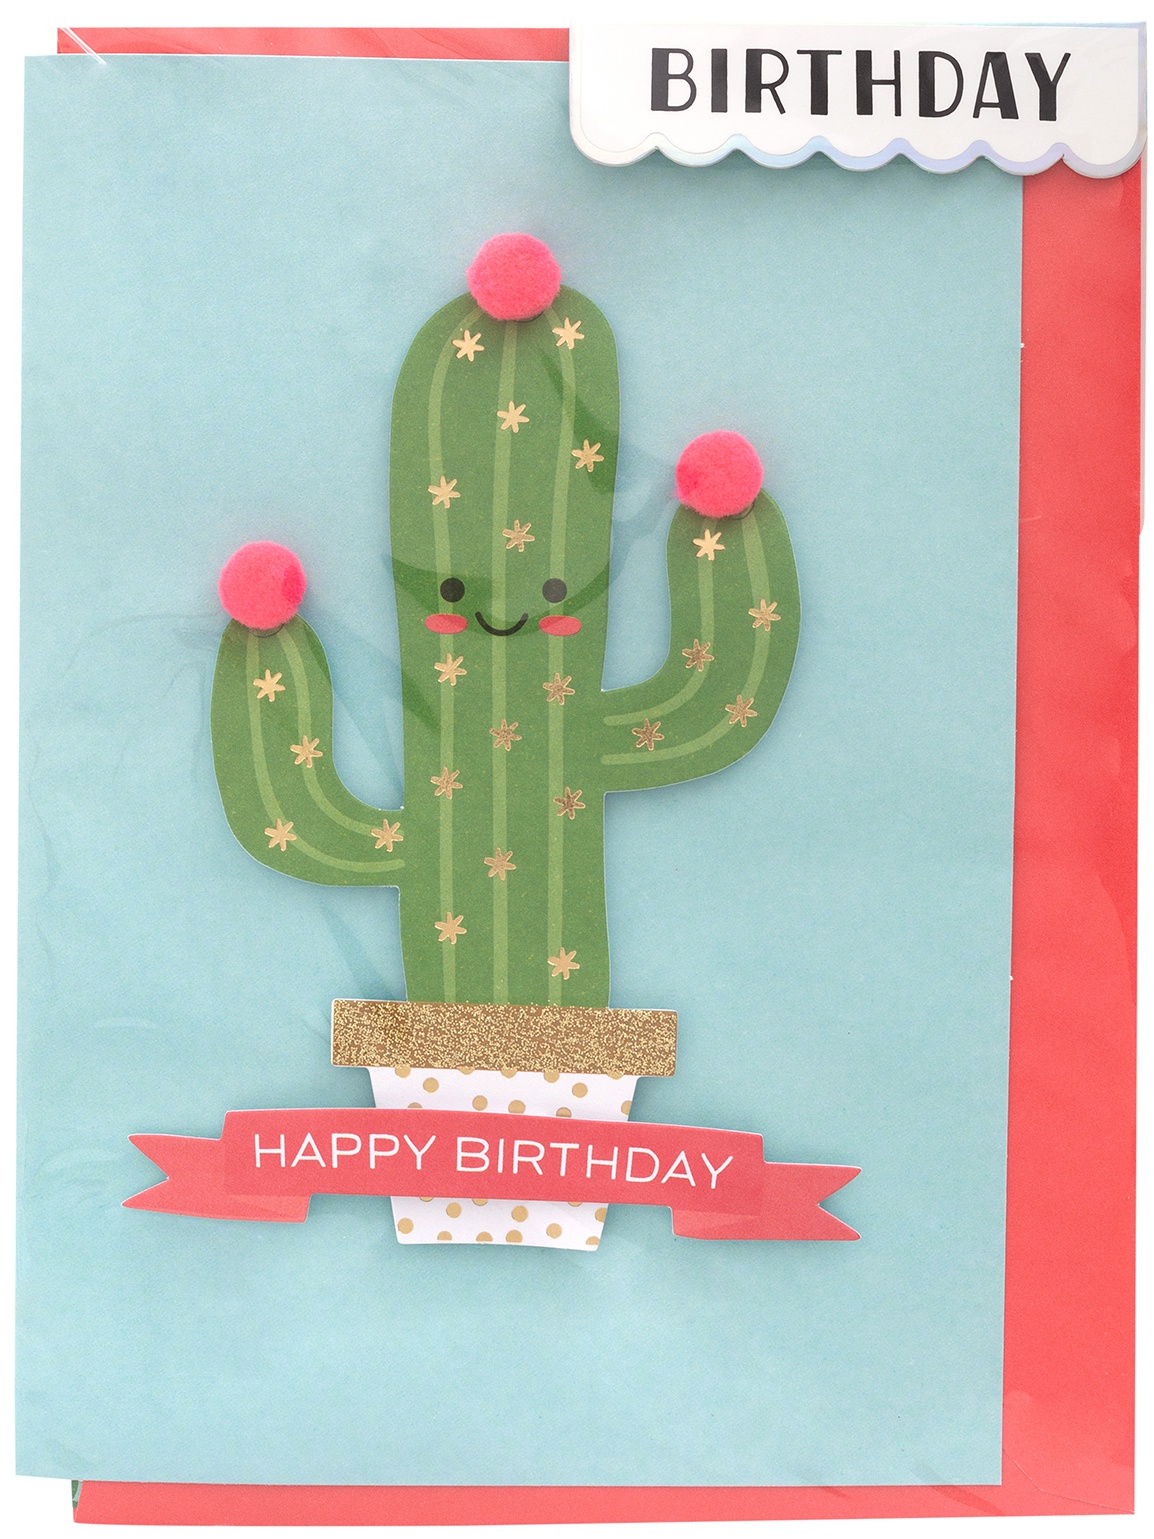 Mail Rapid rise order cheap 3 Pack Crate Paper Card-Birthday Greeting -355421 Cactus